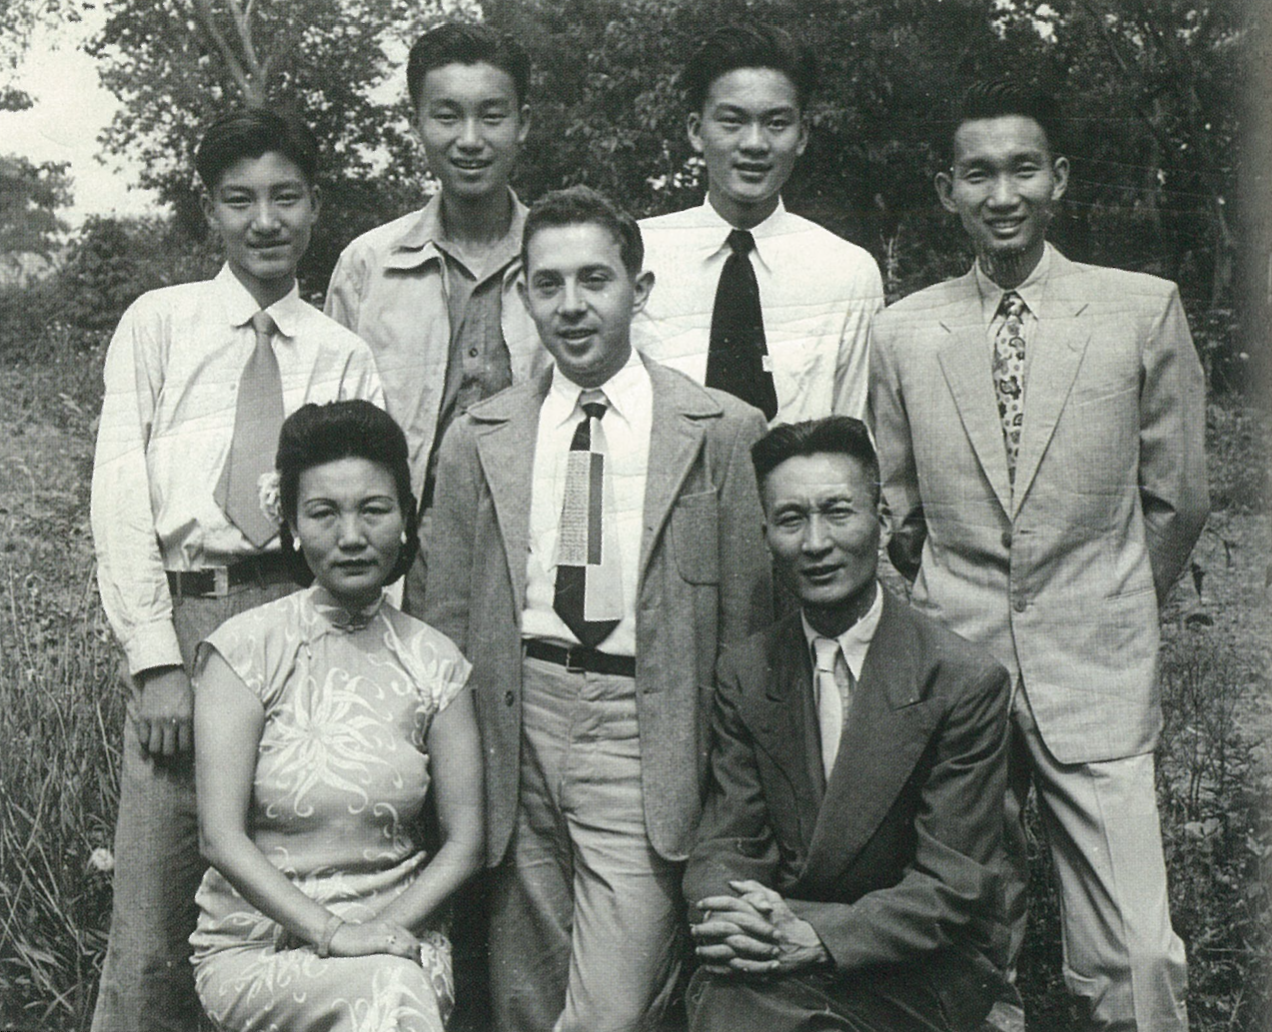 Fig.7. The author with the Sie (Hsieh, Xie) family with whom he ‘lived for almost four years in Nanking, 1946-1950, while a student at the University of Nanking.’ Seated in front, Mrs. Sie (Zhang Shaoliang) and Mr. Sie (Xie Xiang). From left to right standing at back: Willie 14, 5’ 8” (Xie Lie); John 18, 6’ 2” (Xie Ran); Paul 19, 6’ 3” (Xie Tao); Peter 23, 6’ 1” (Xie Jie). ‘Mrs. Sie came out the worst of the lot of us, cause she isn’t smiling. Not typical of her. (I think Willy was pinching John and had just been scolded for it by his mom, which explains those three expressions.) June 6, 1948.’ Passages in quotation marks and the heights and ages of the sons are taken from the author’s caption written on the back of the photograph. From the author’s papers.